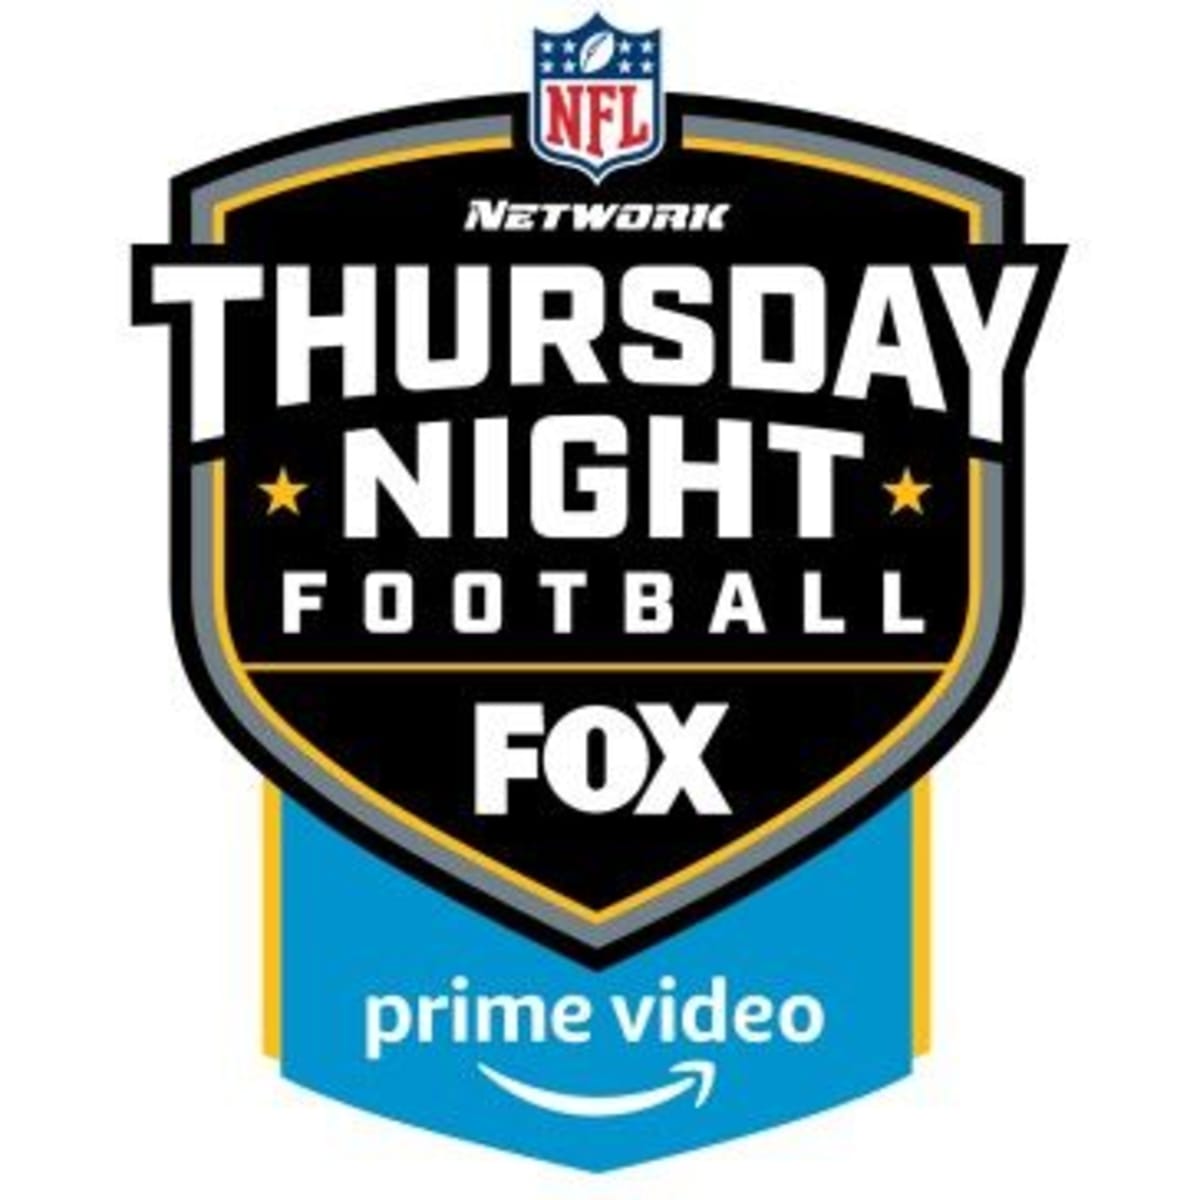 nfl football thursday night who's playing